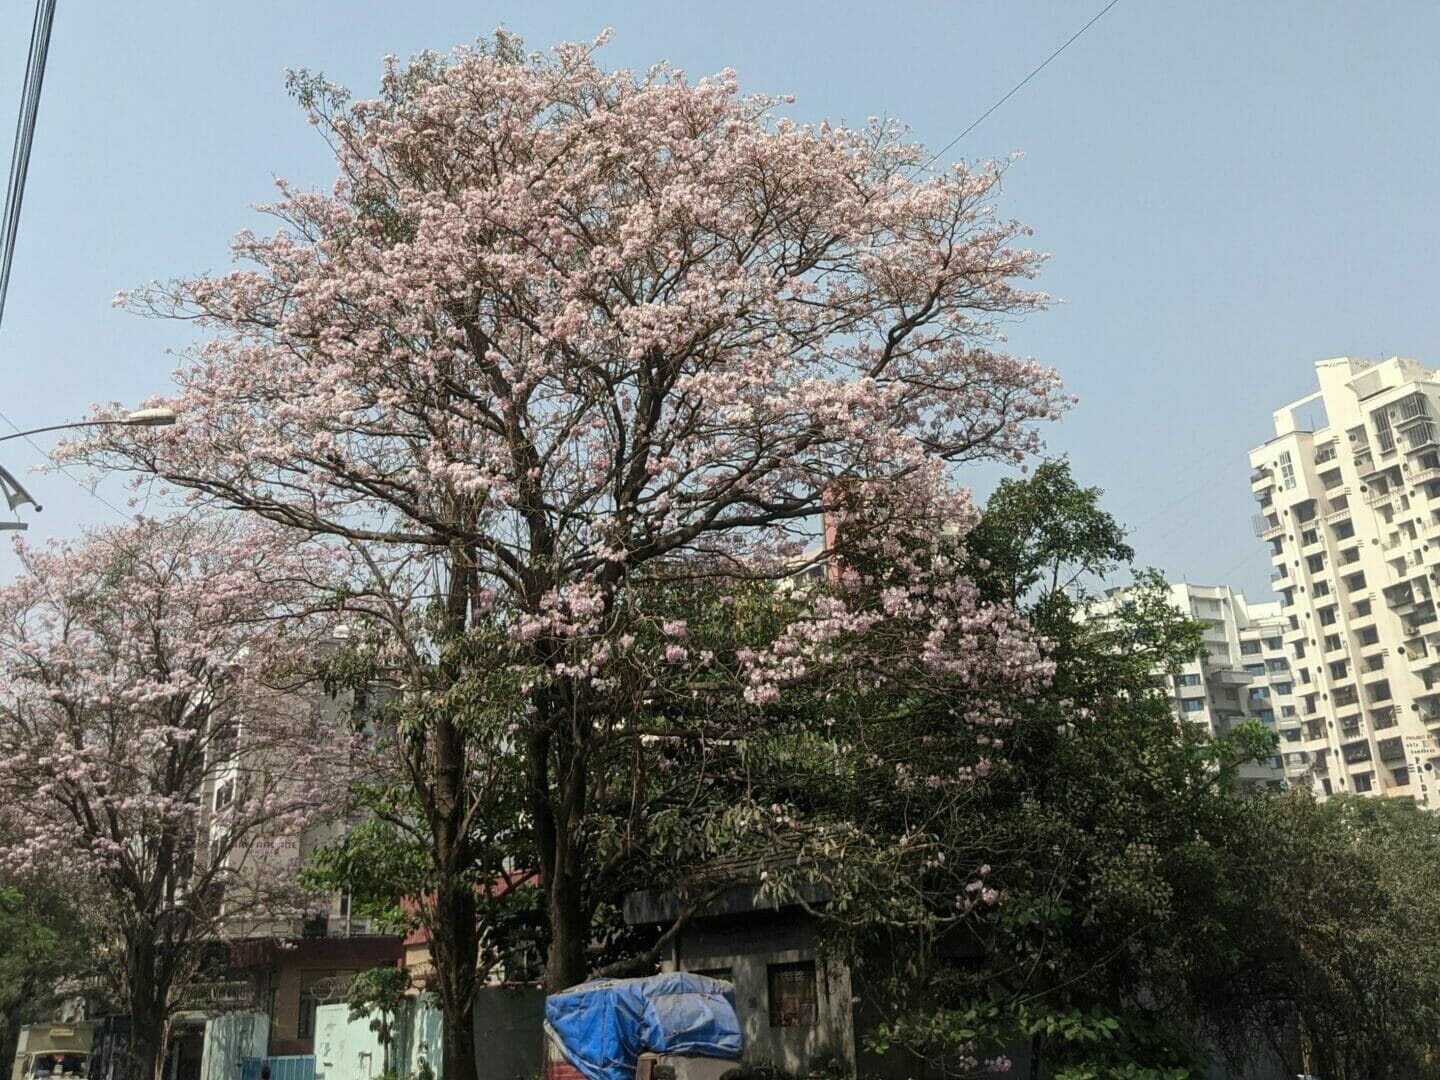 Tabebuia Rosea, common name Pink or Rosy Trumpets